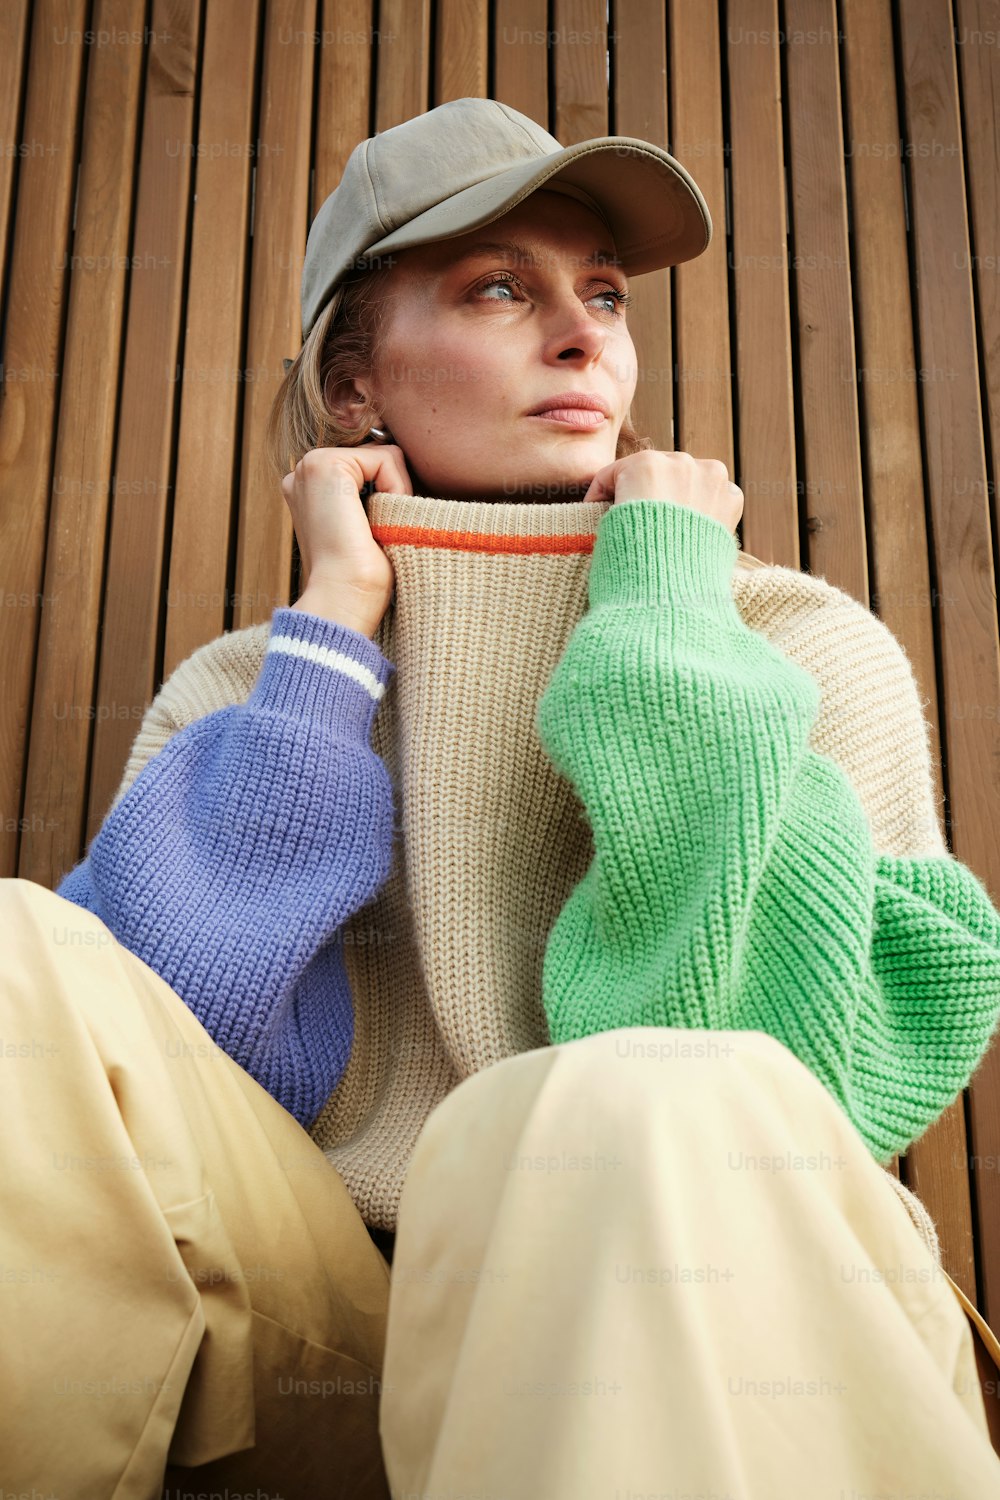 a woman sitting on the ground wearing a hat and sweater